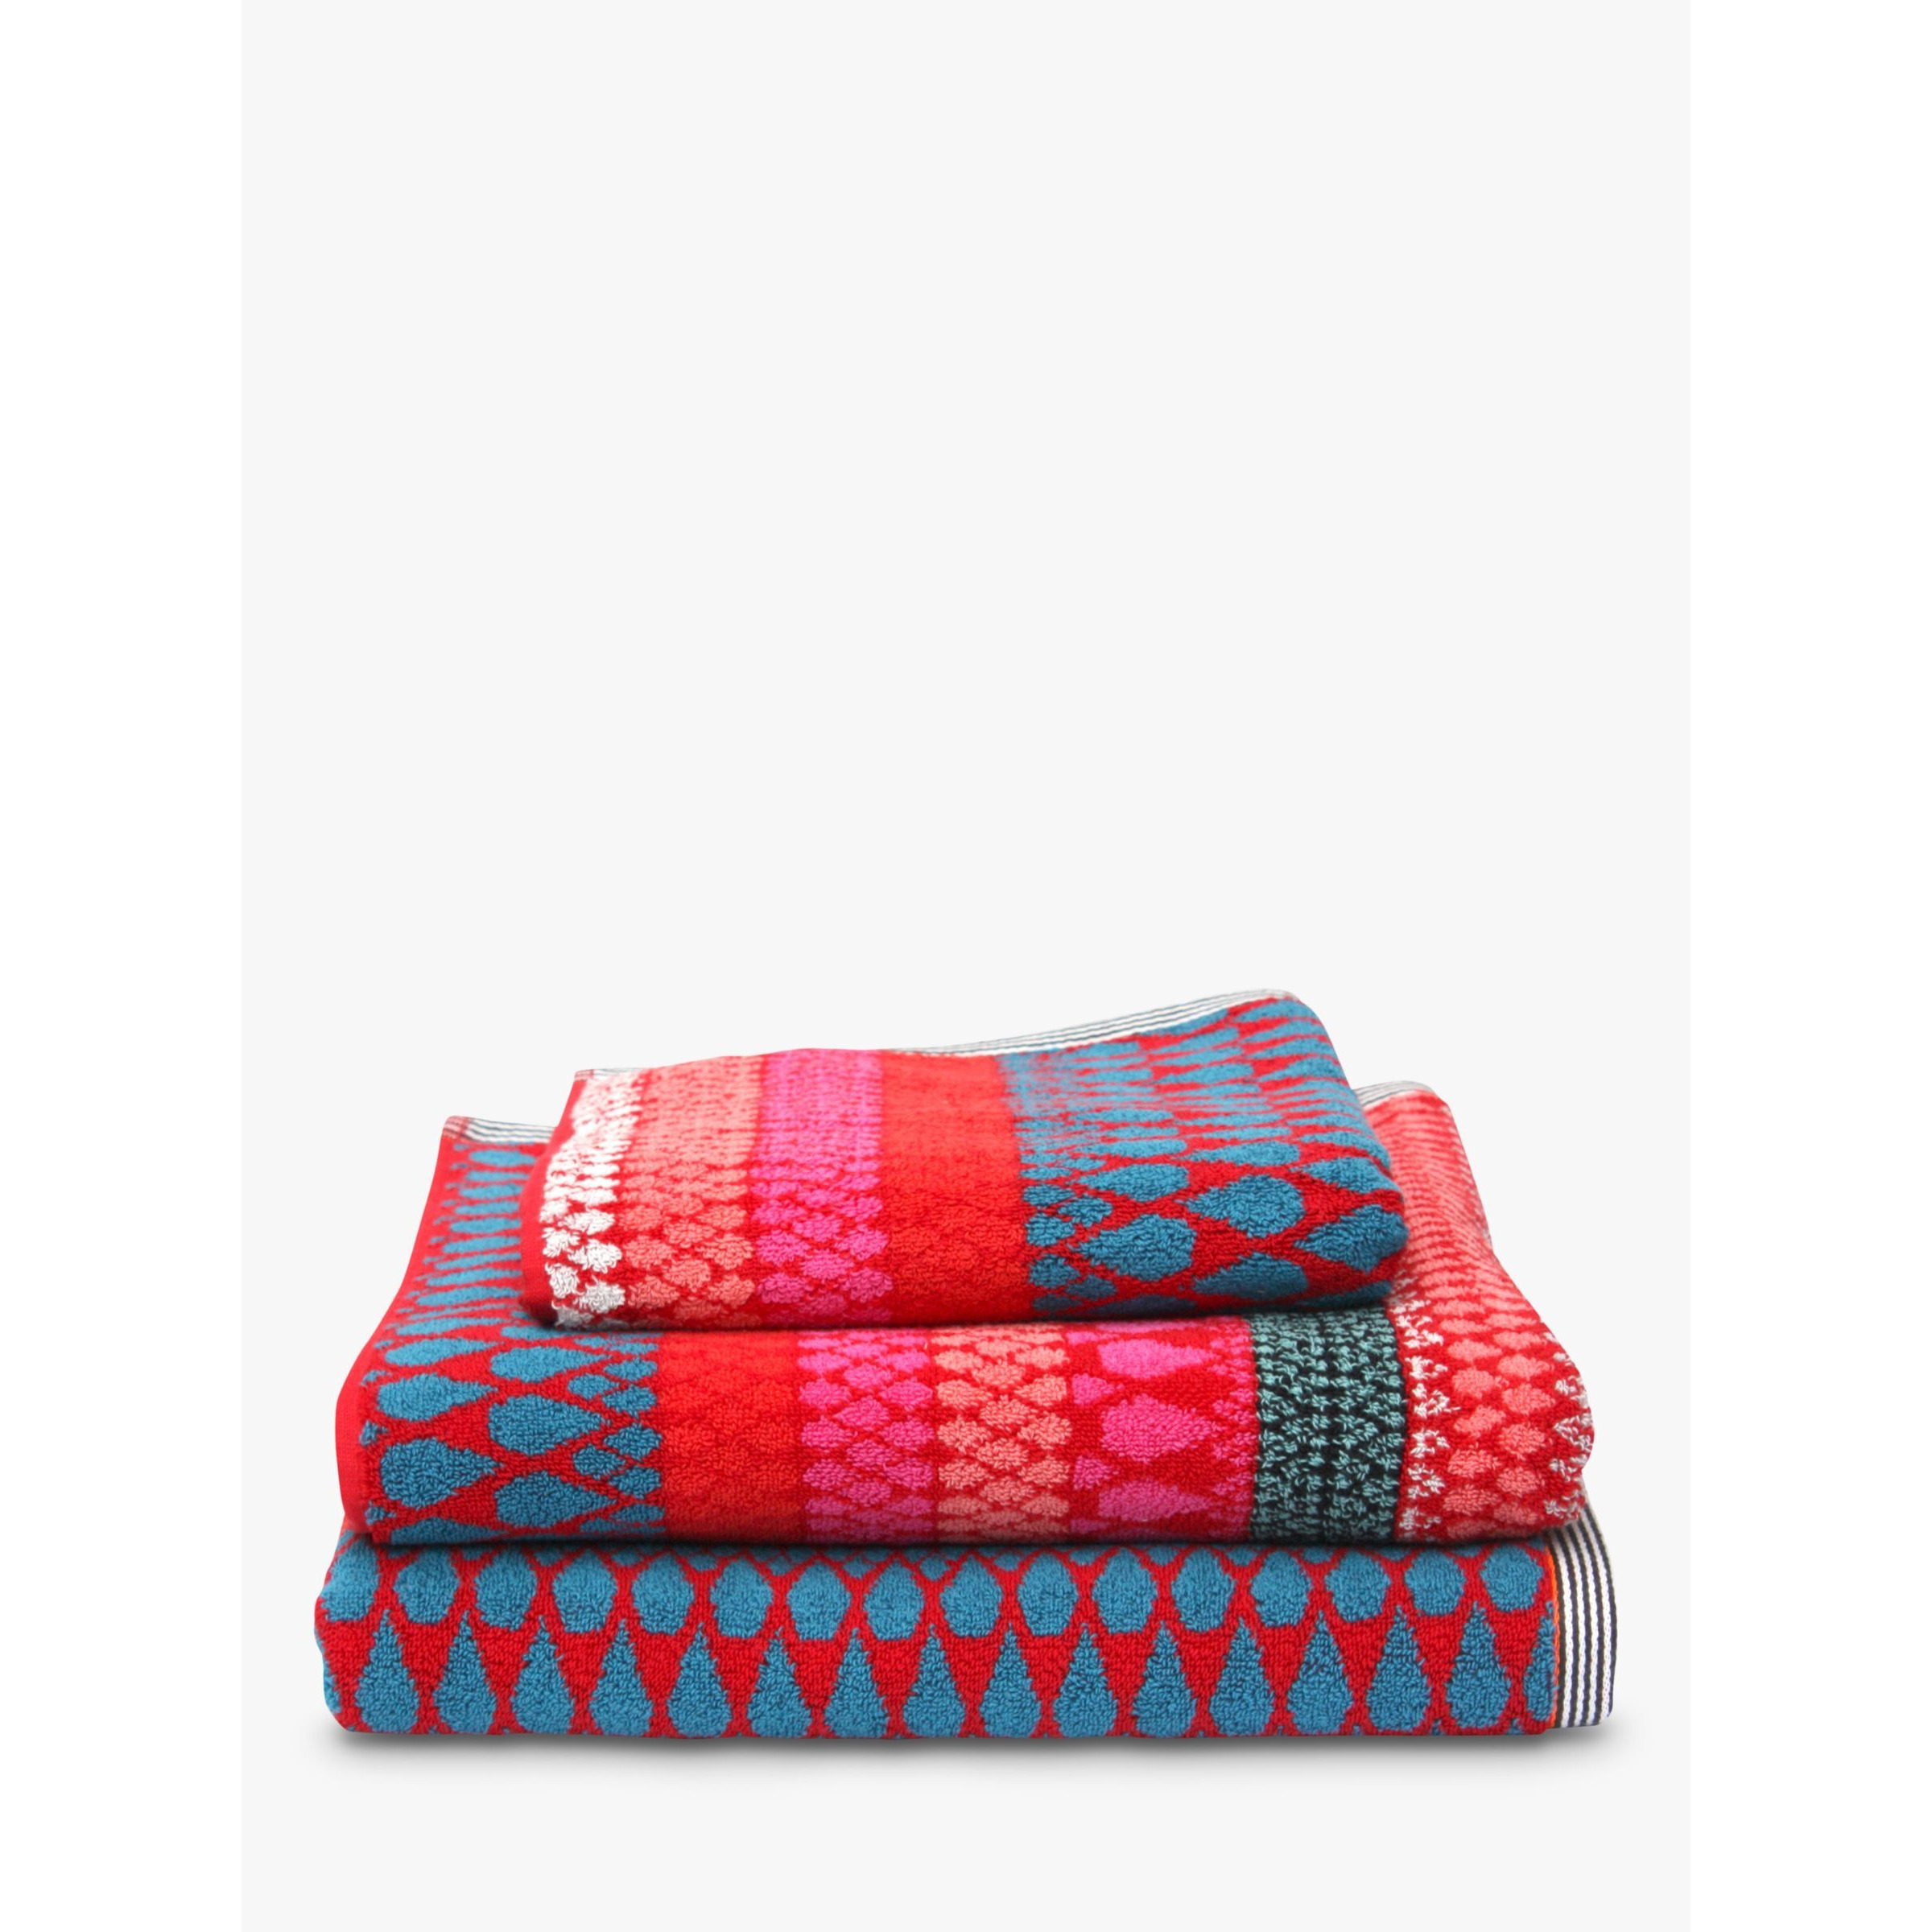 Margo Selby for John Lewis Faversham Towels, Red - image 1